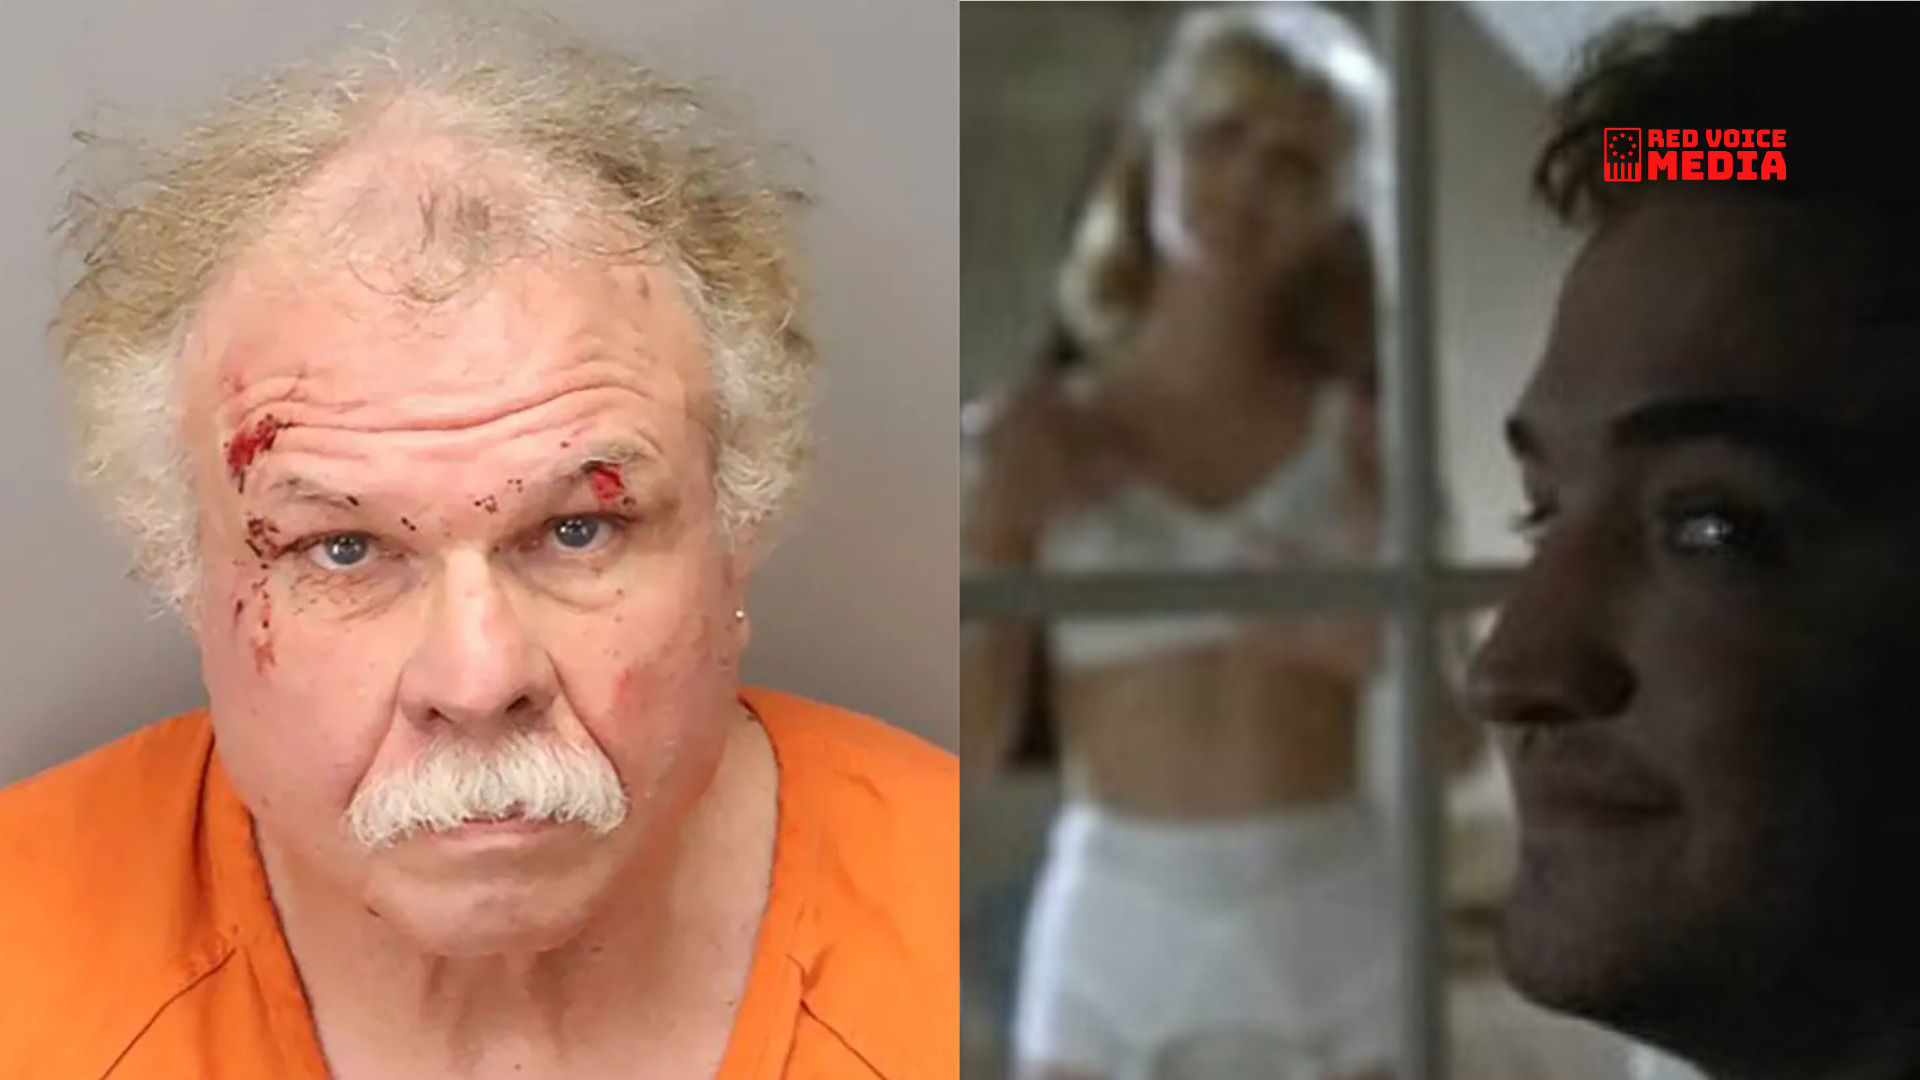 Half-naked 71-year-old man from Florida arrested for voyeurism [VIDEO]